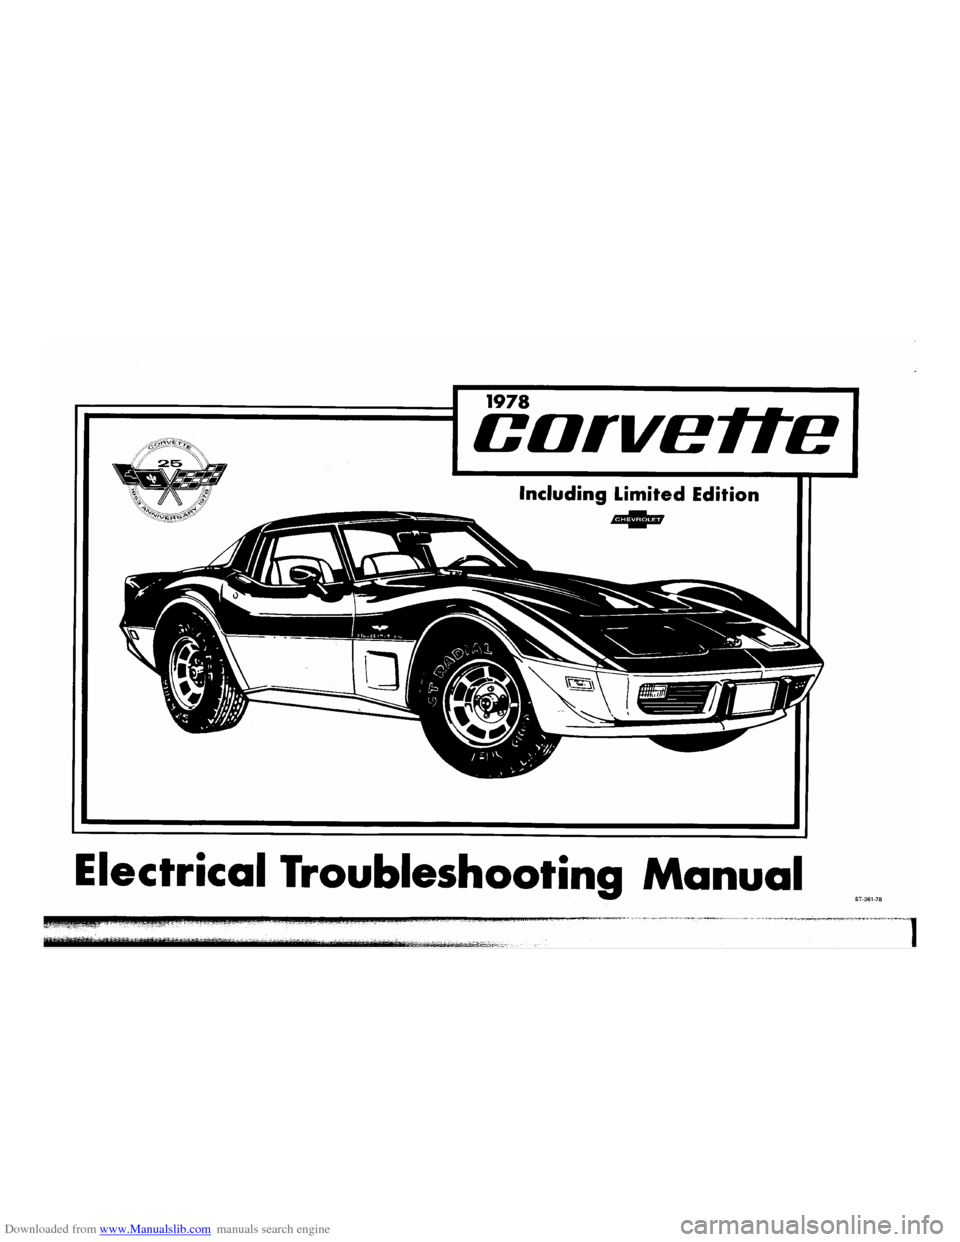 CHEVROLET CORVETTE 1978 3.G Electrical Troubleshooting Manual 